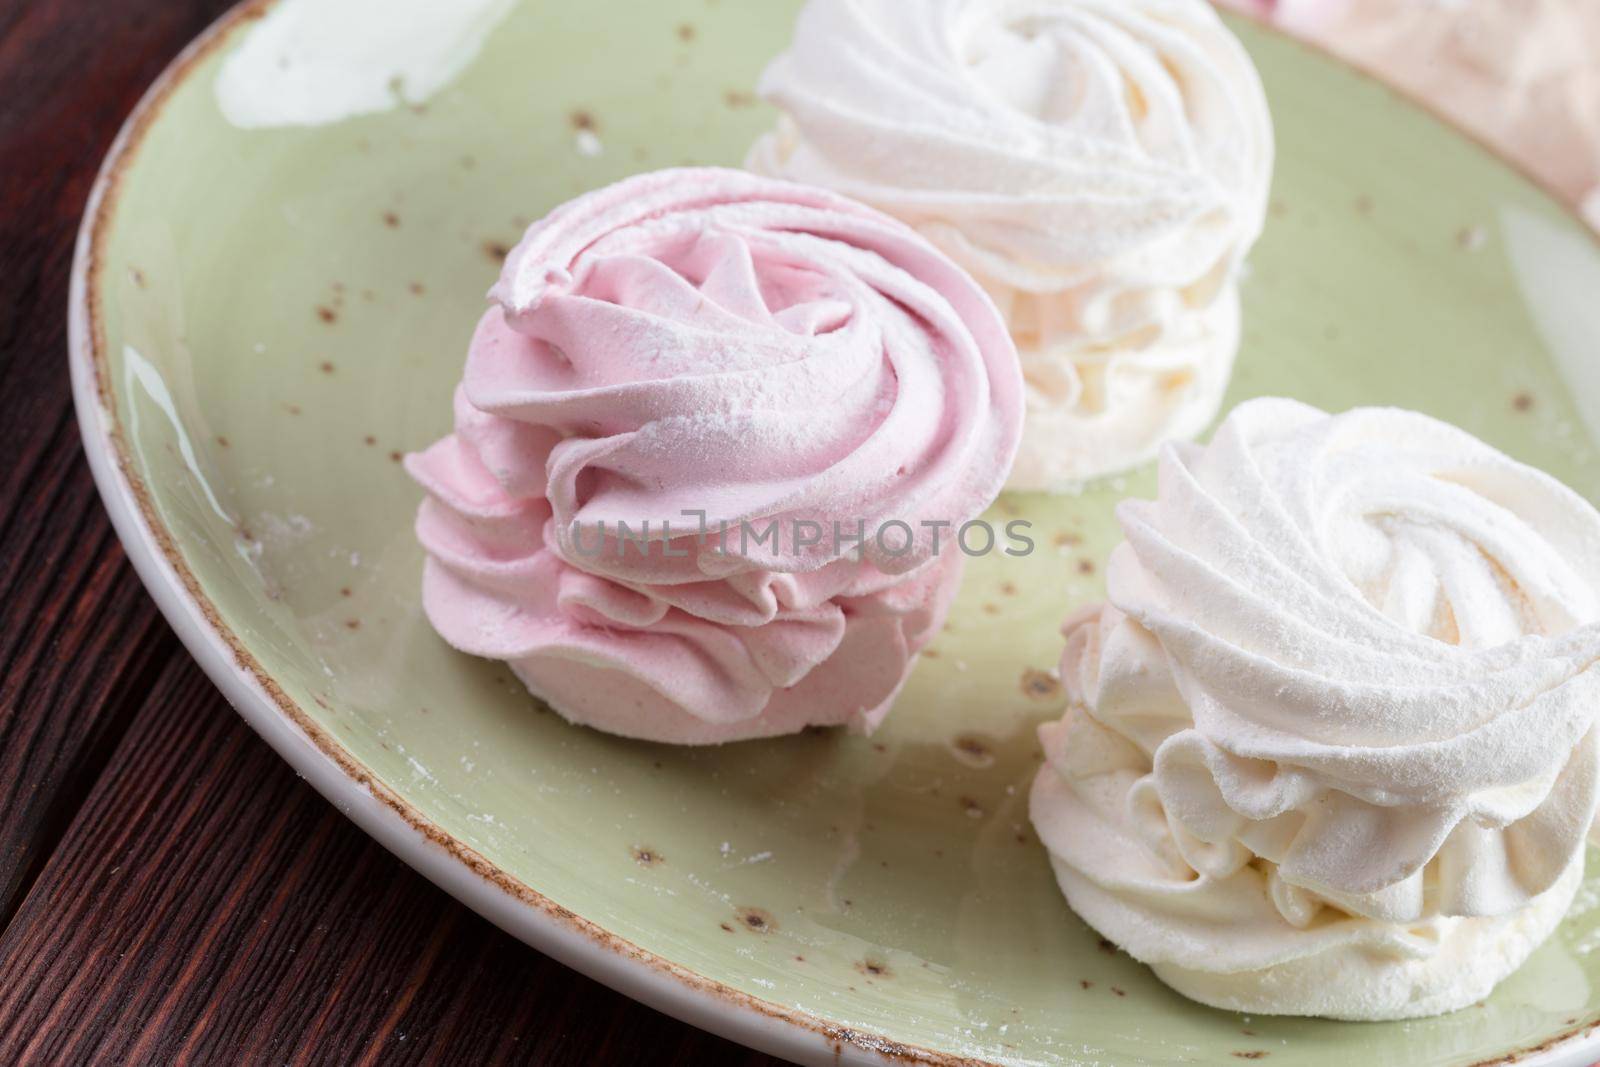 Pink and white meringue cookies on green plate by Fabrikasimf